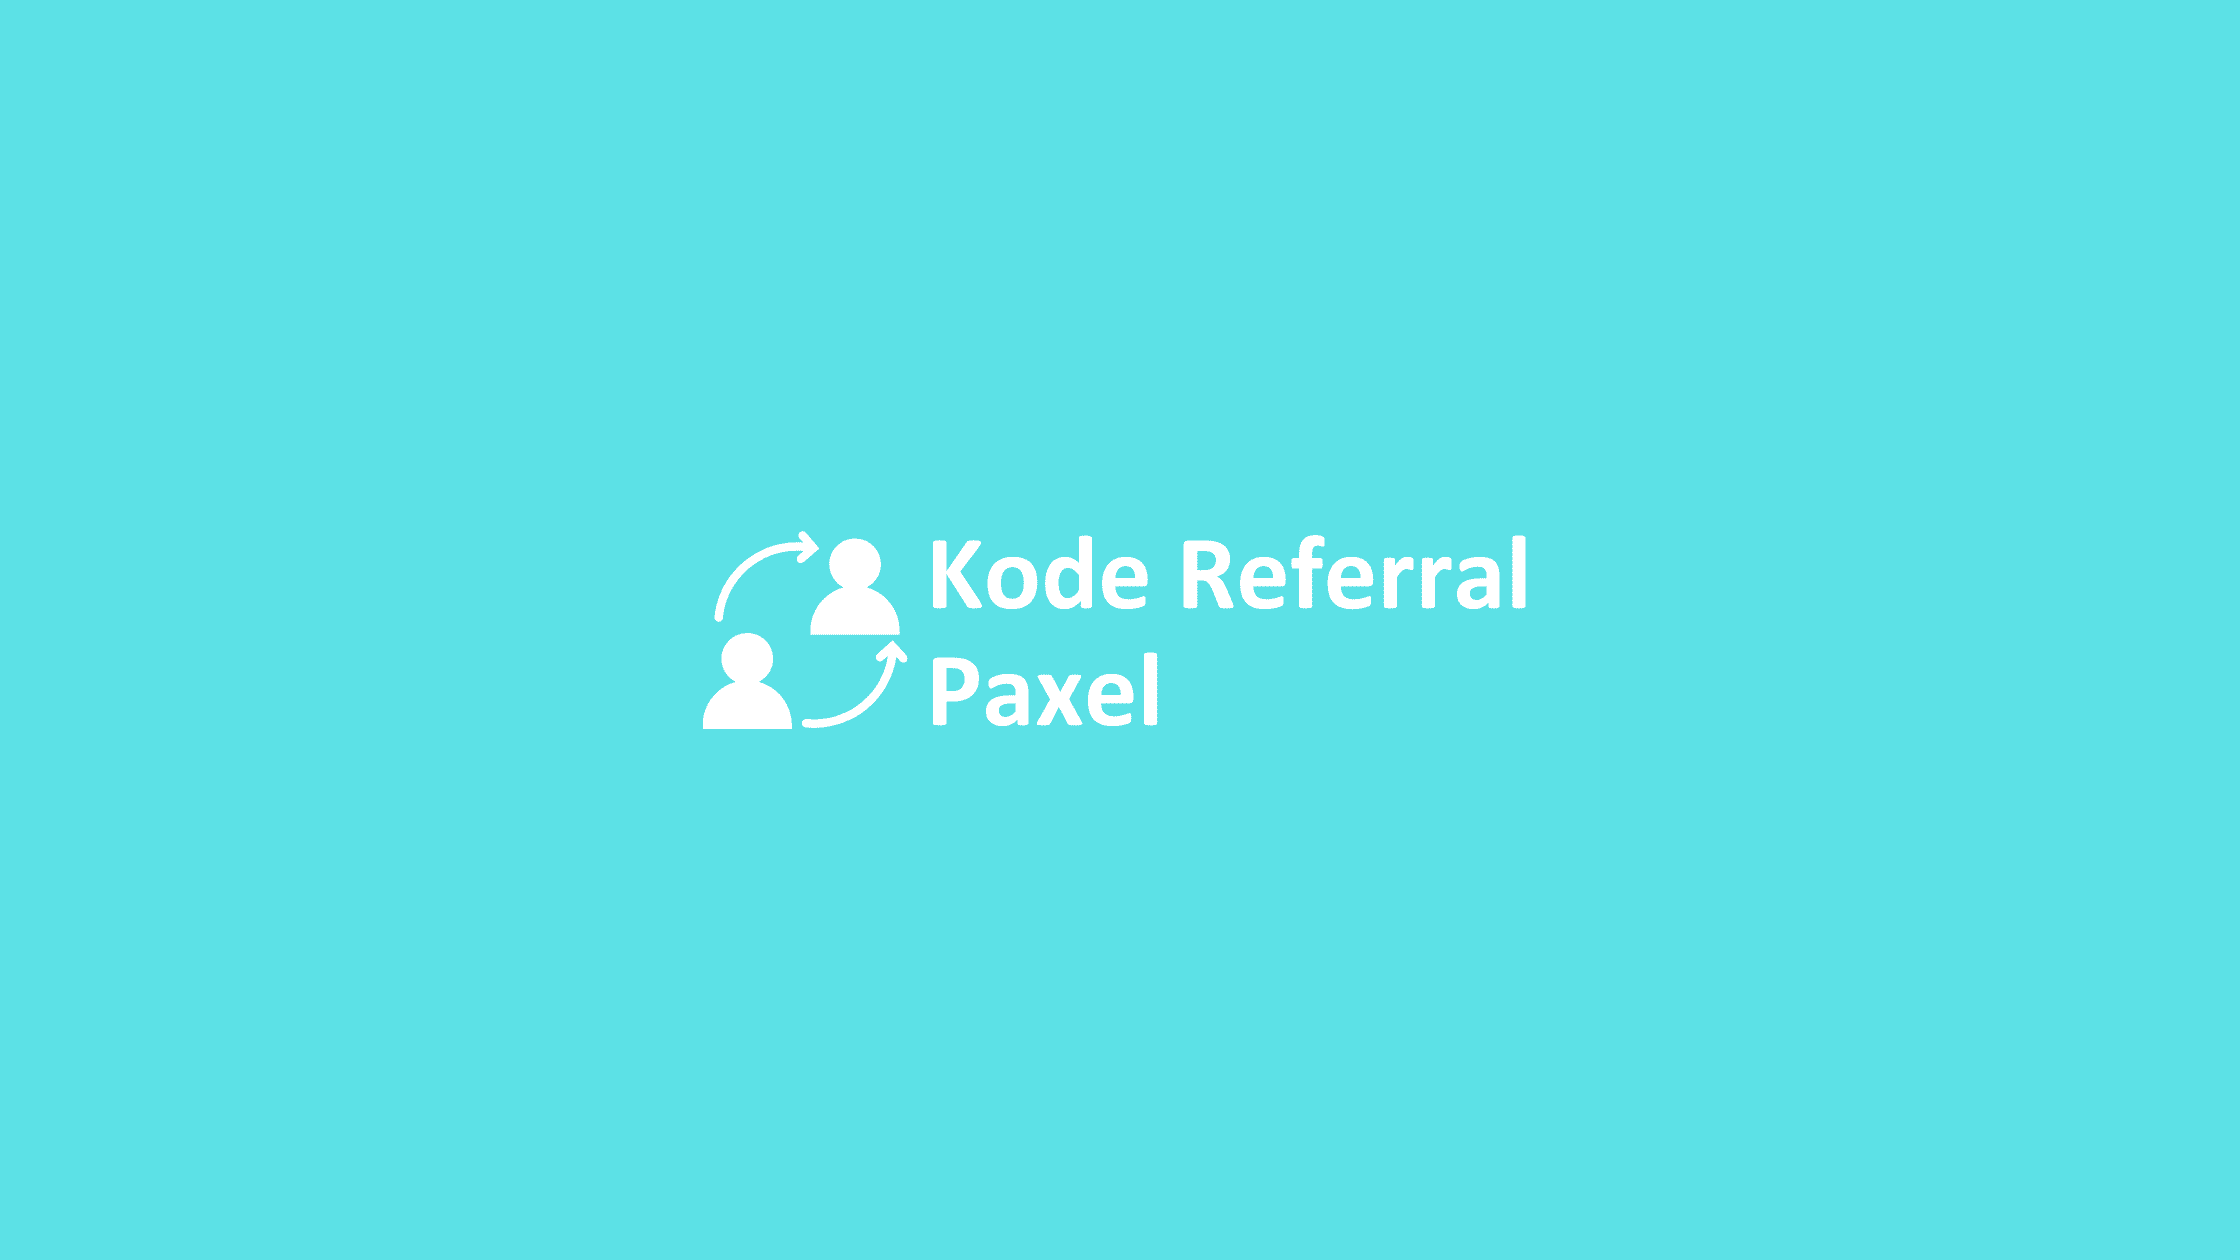 kode referral paxel